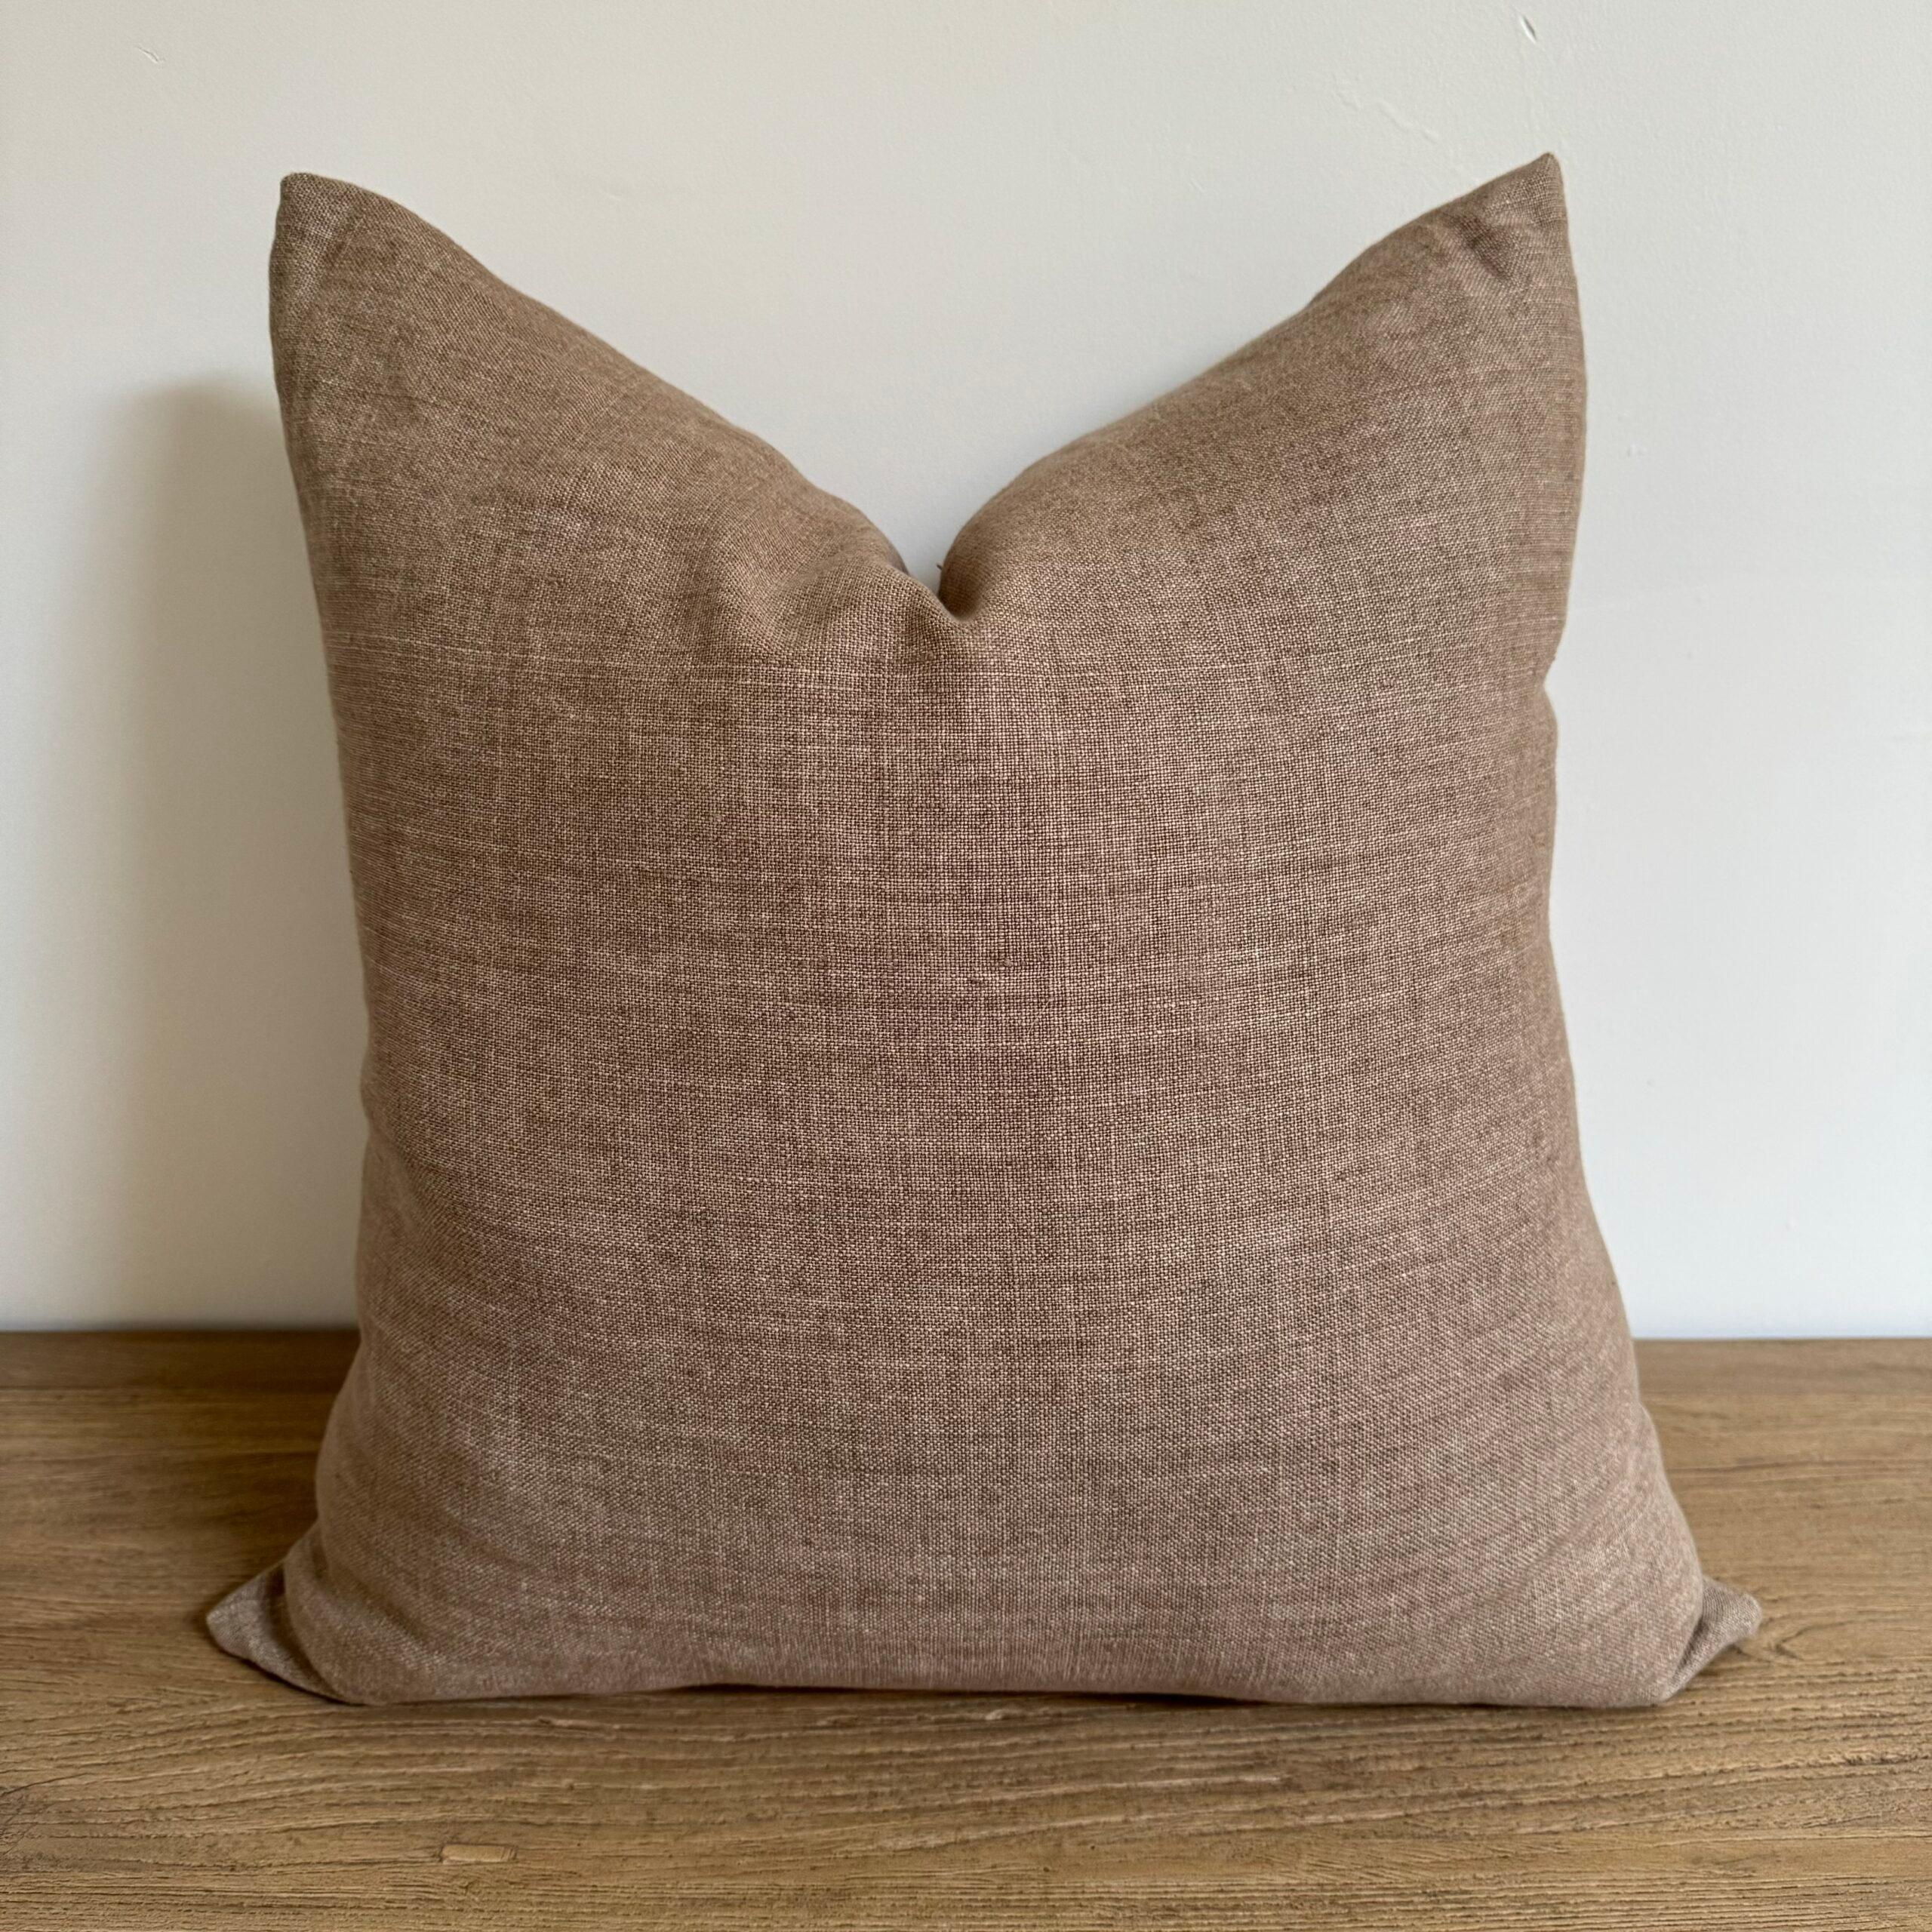 Linen pillow in a coco brown color with a wash finish.
Antique Brass Zipper closure
Overlocked seams.
Includes Down Feather Insert
Color: coco brown
Size: 22x22
51,000 Double Rubs
Extremely soft to the hand.
Care: Can be machine washed, dry cleaning